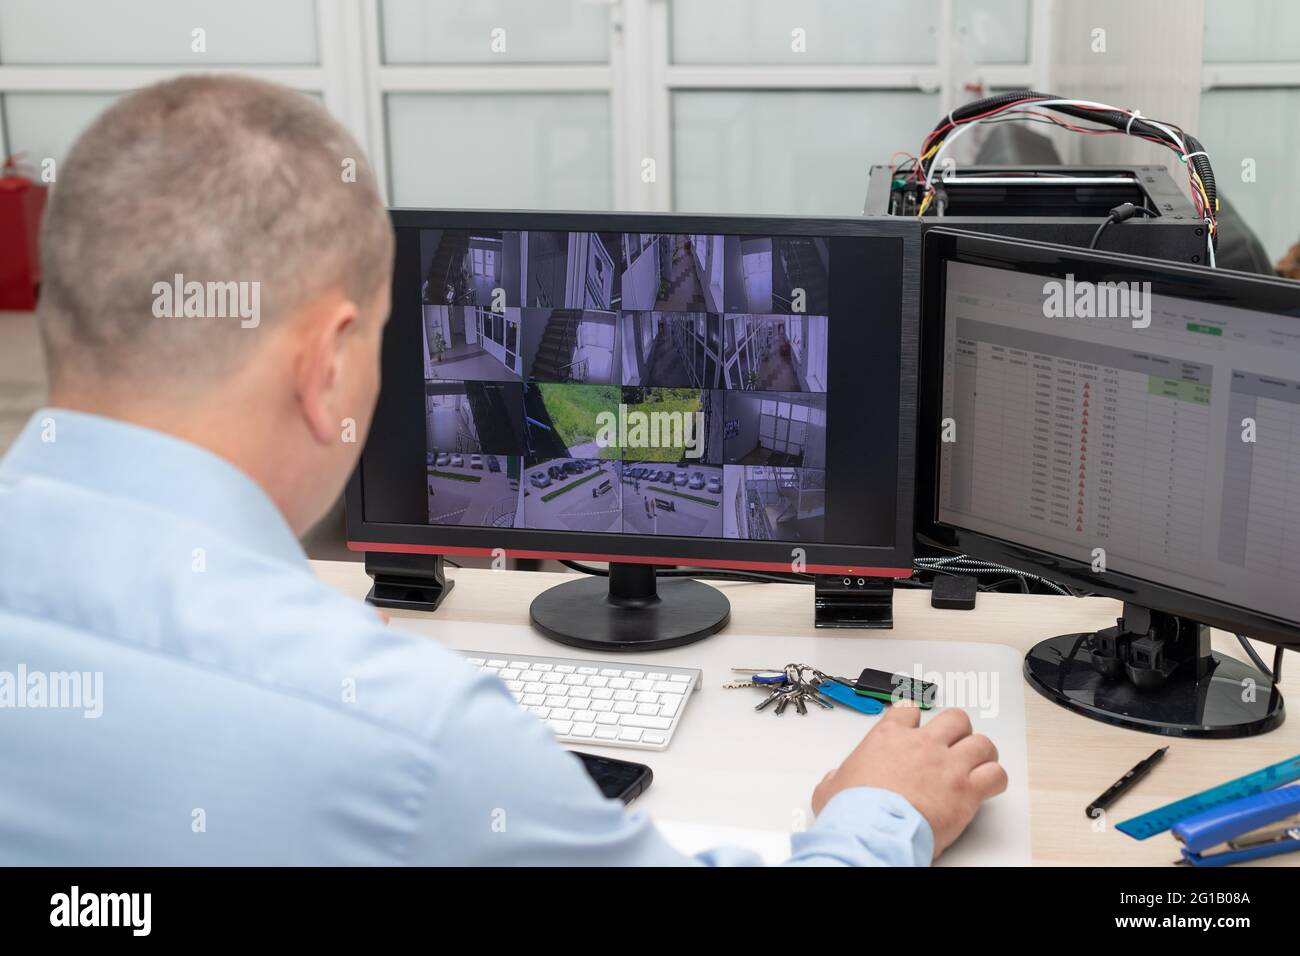 CCTV security system operator monitoring video cameras Stock Photo